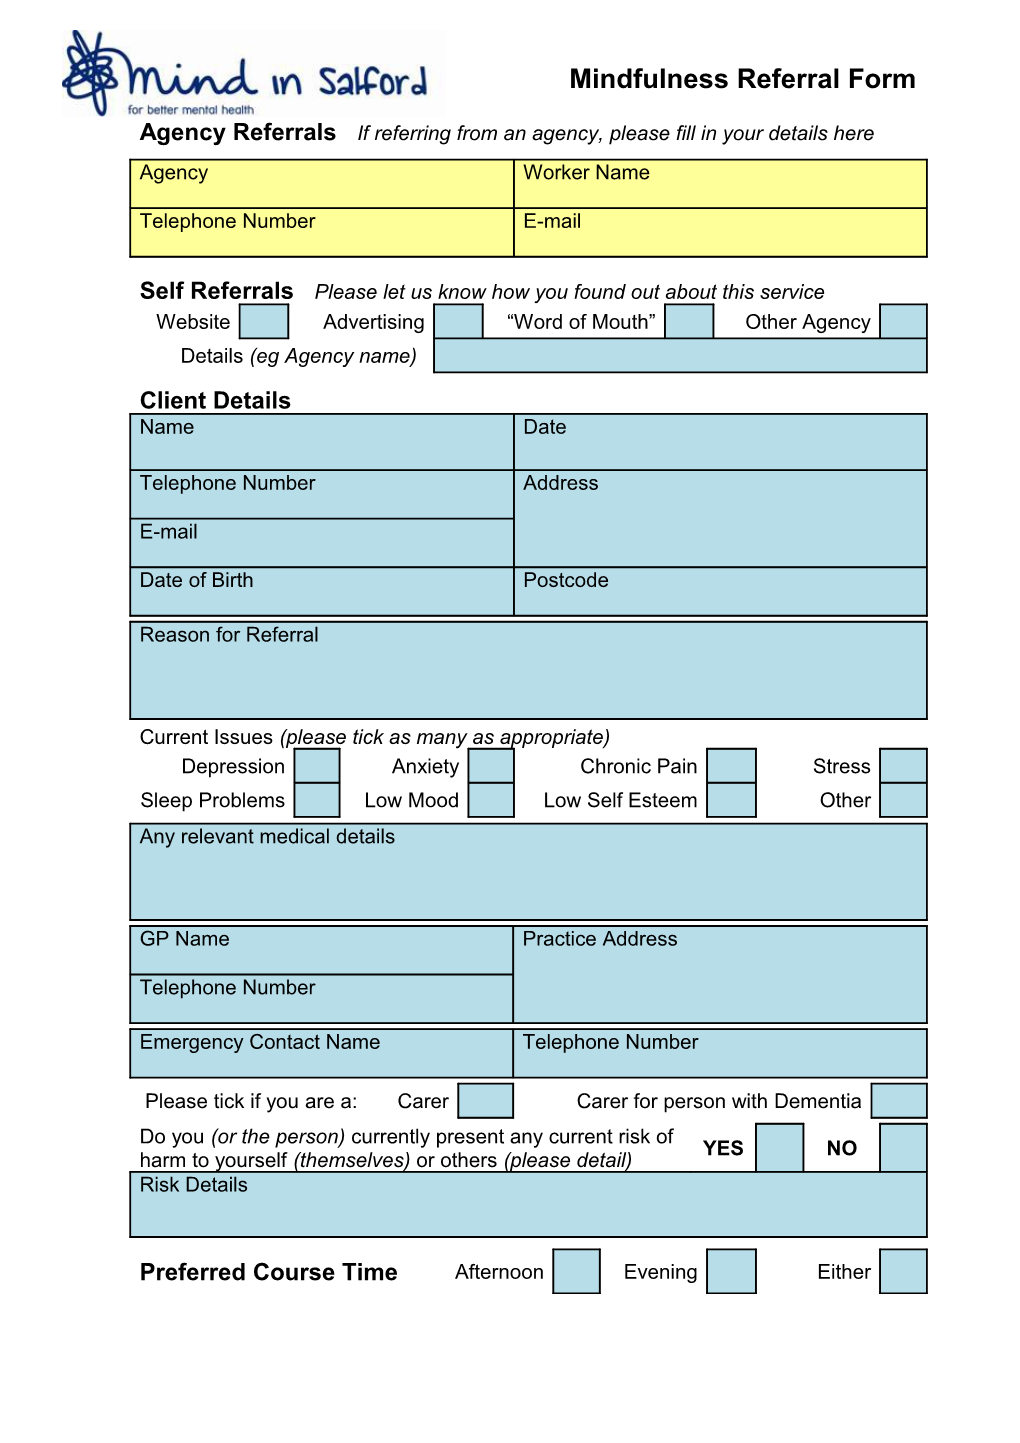 Confidentiality Consent Form